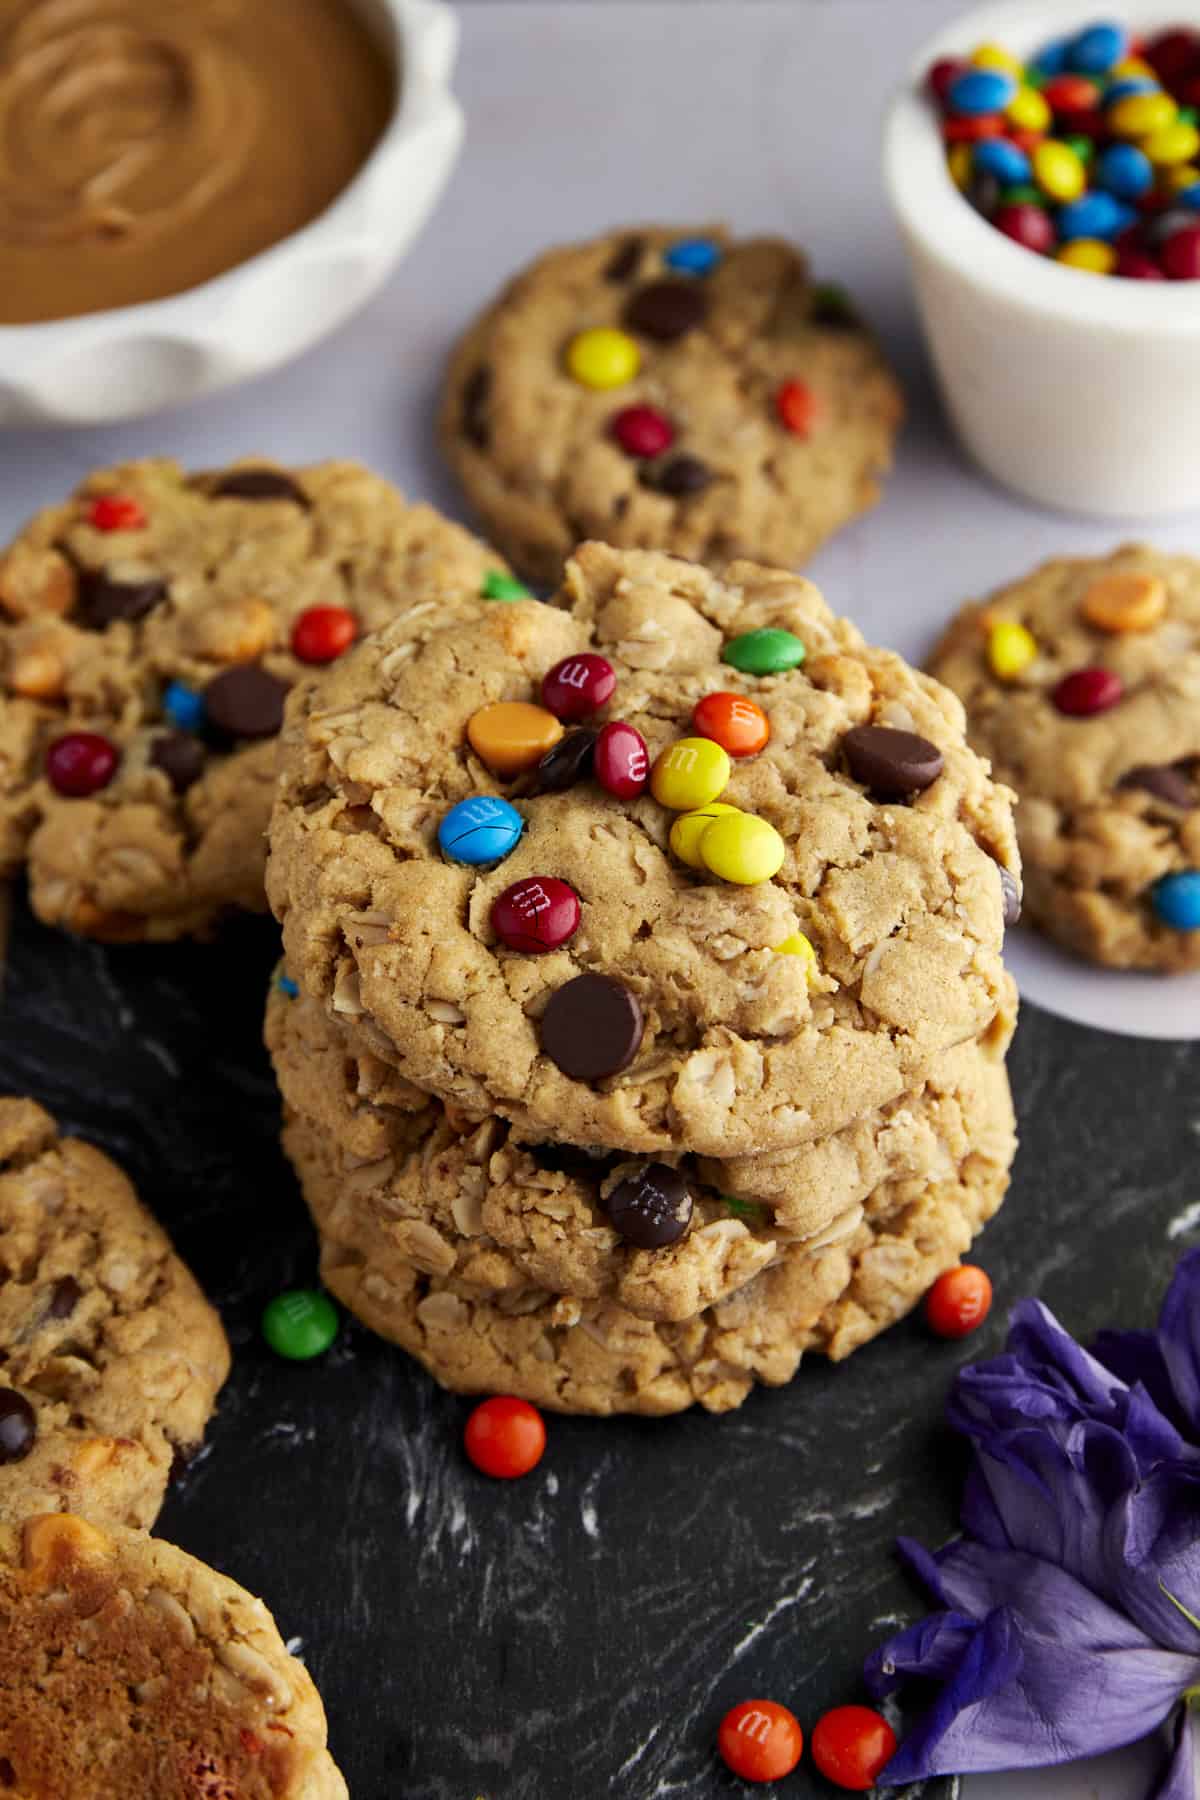 Monster cookies topped with M&M's and chocolate chips with bowls of peanut butter and M&M's in the background